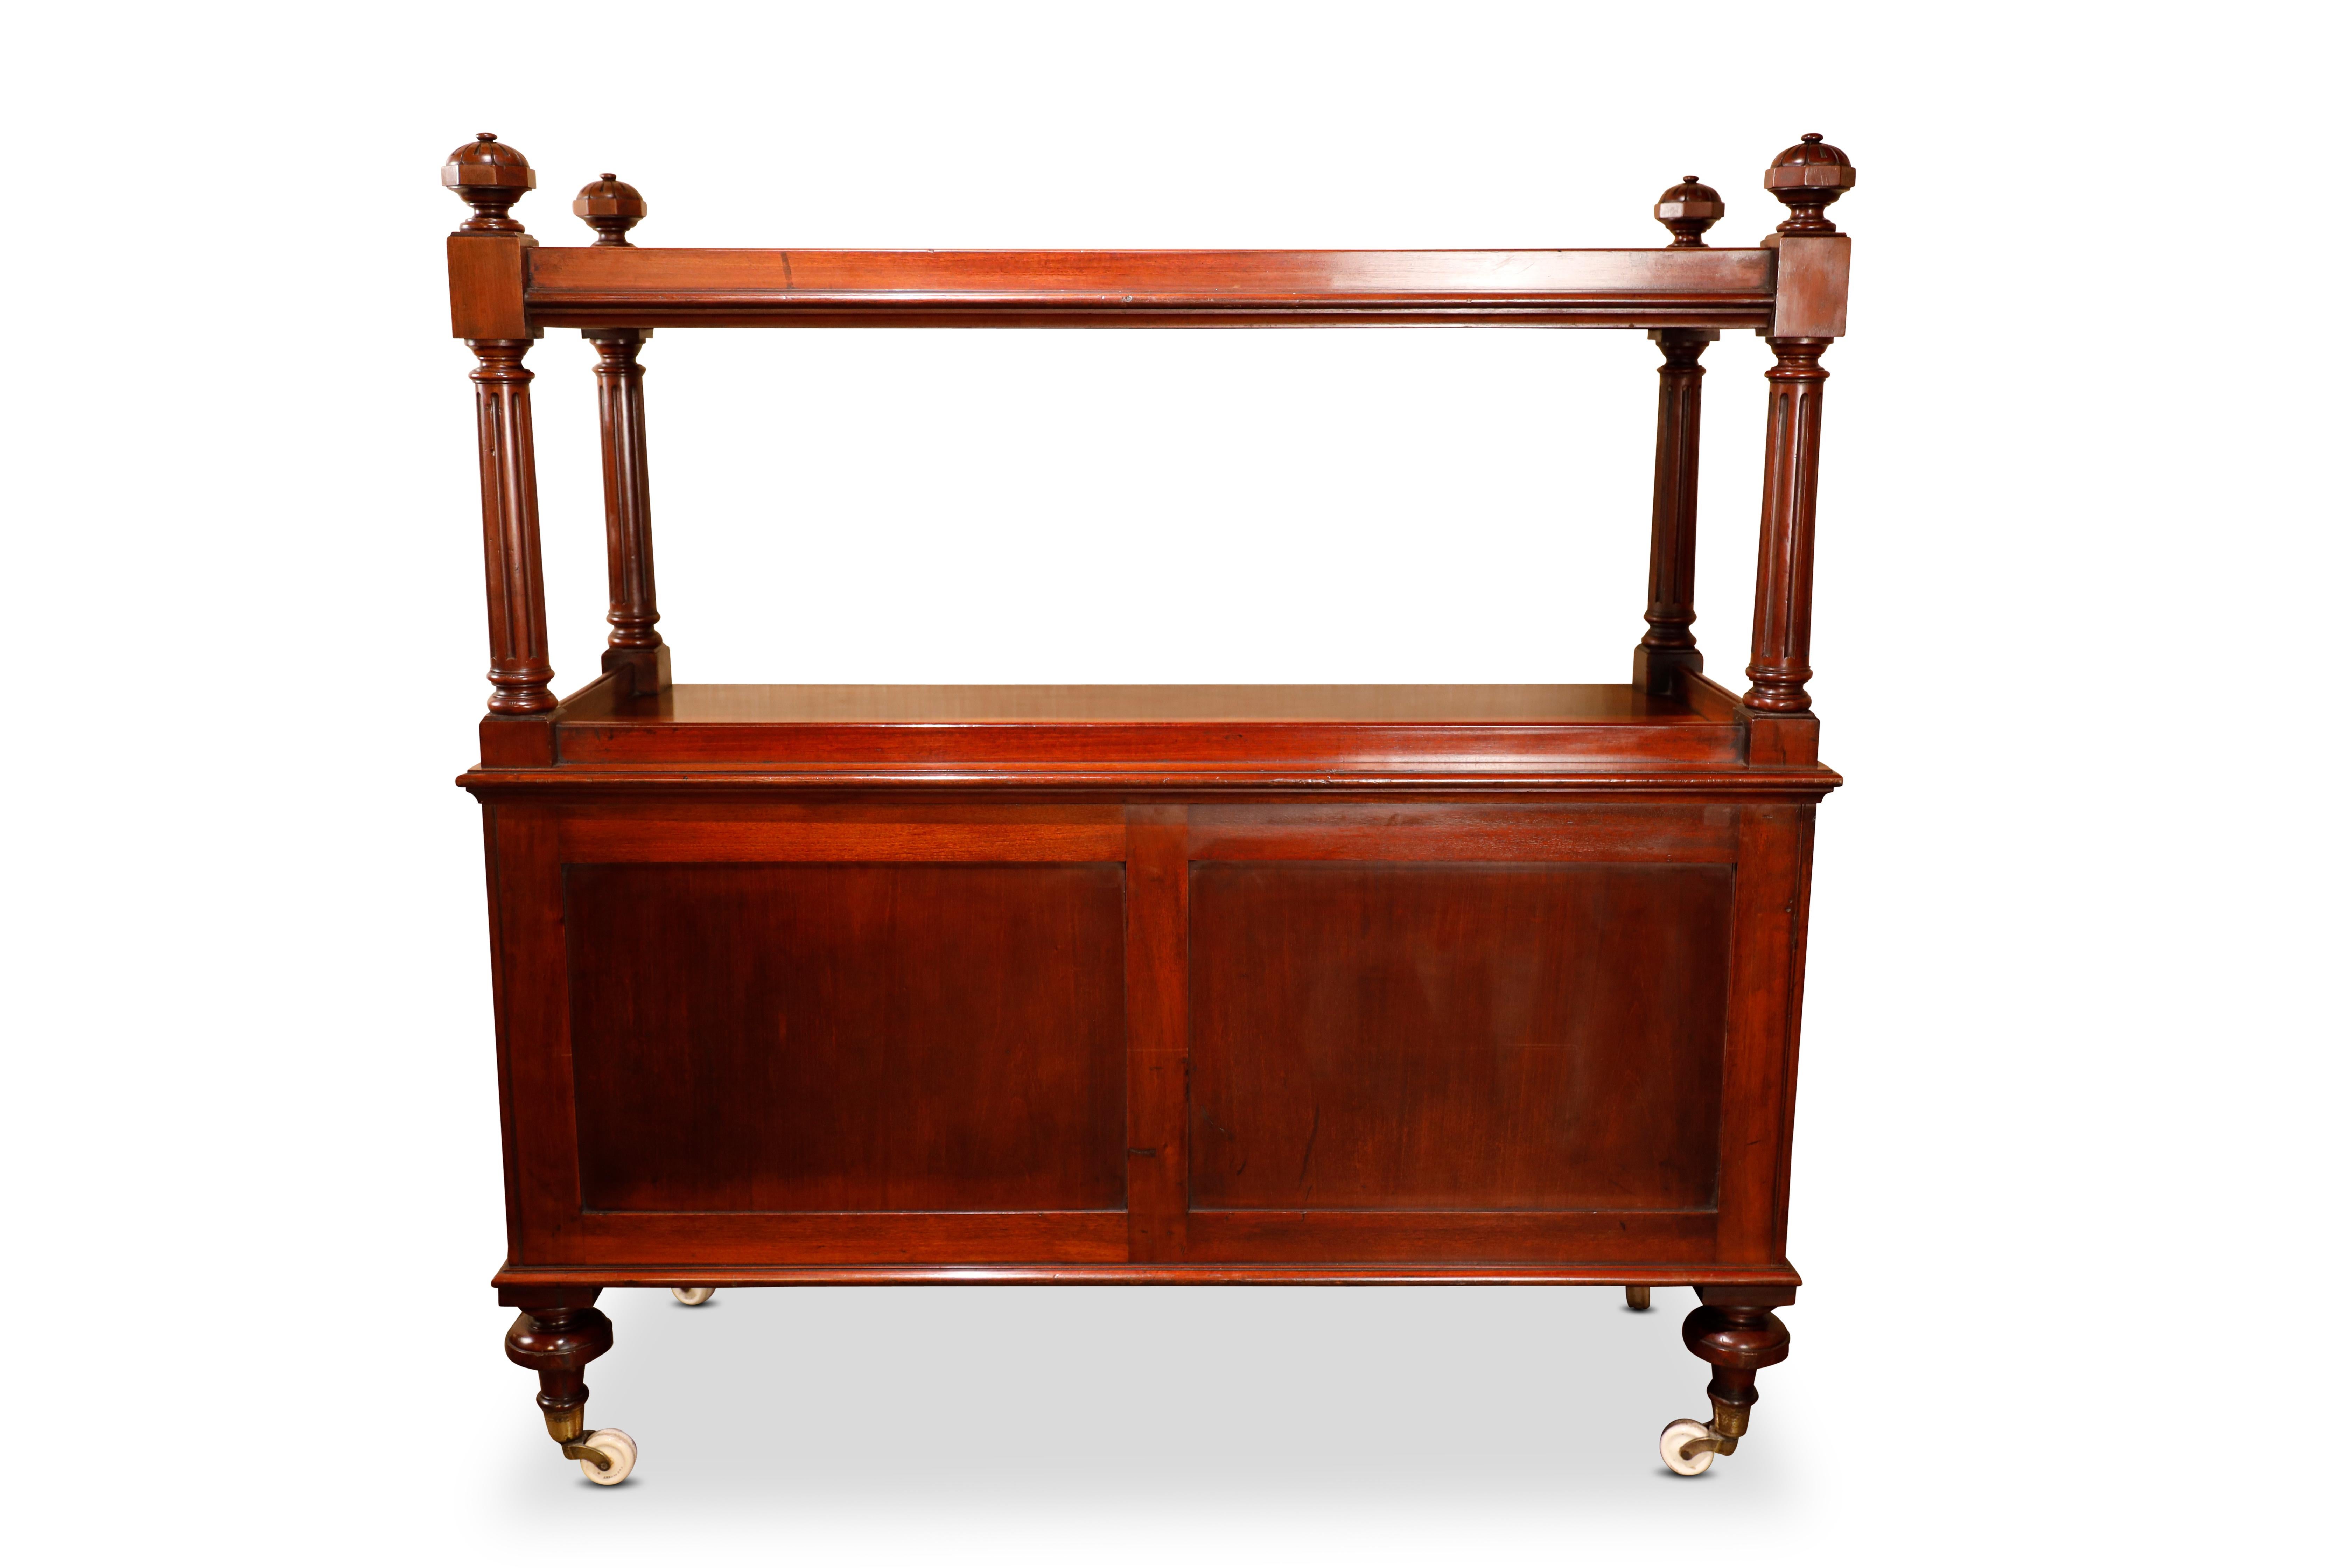 19th Century Victorian Mahogany Trolly / Dumbwaiter For Sale